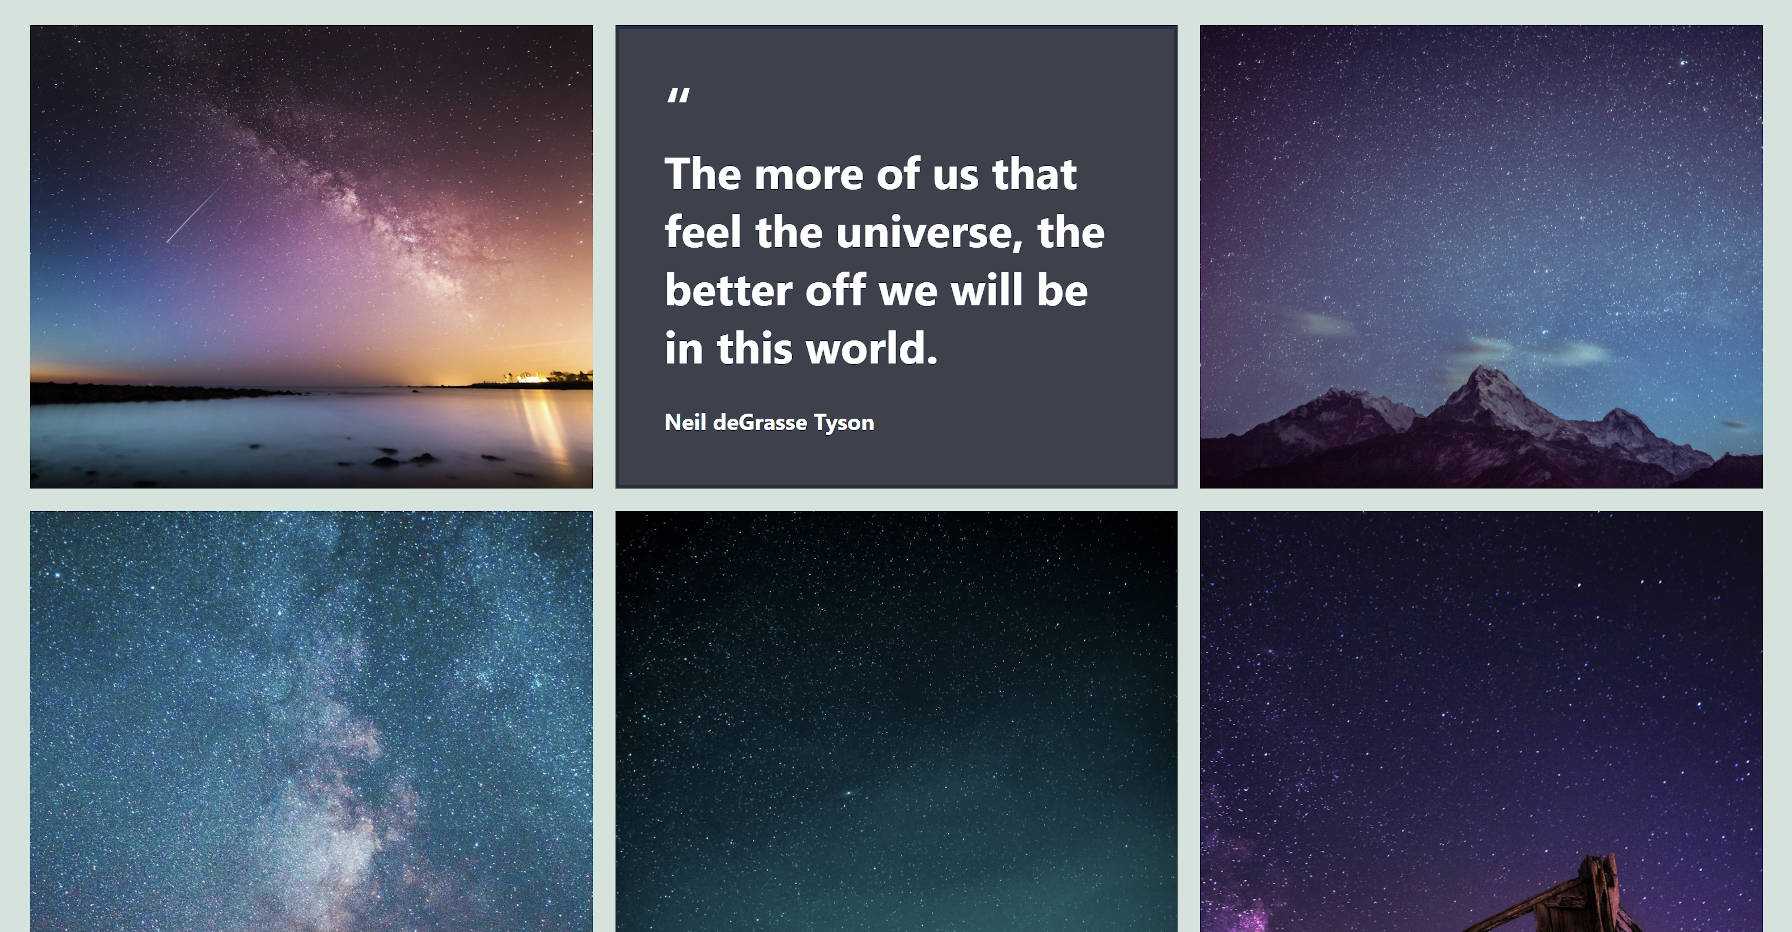 Image gallery with a quote as one of the grid items.